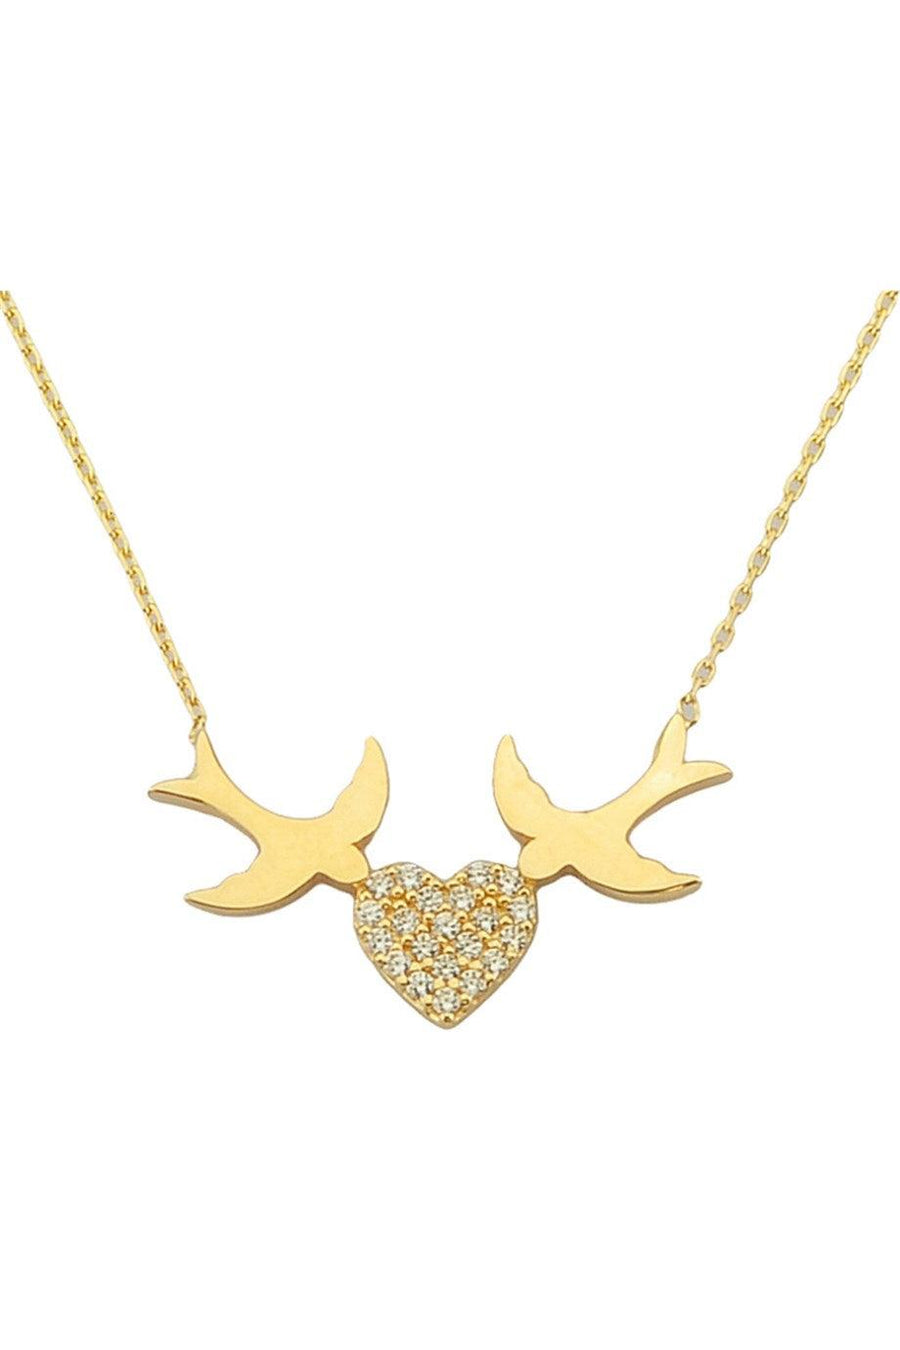 Gold -Hearted Bird Necklace